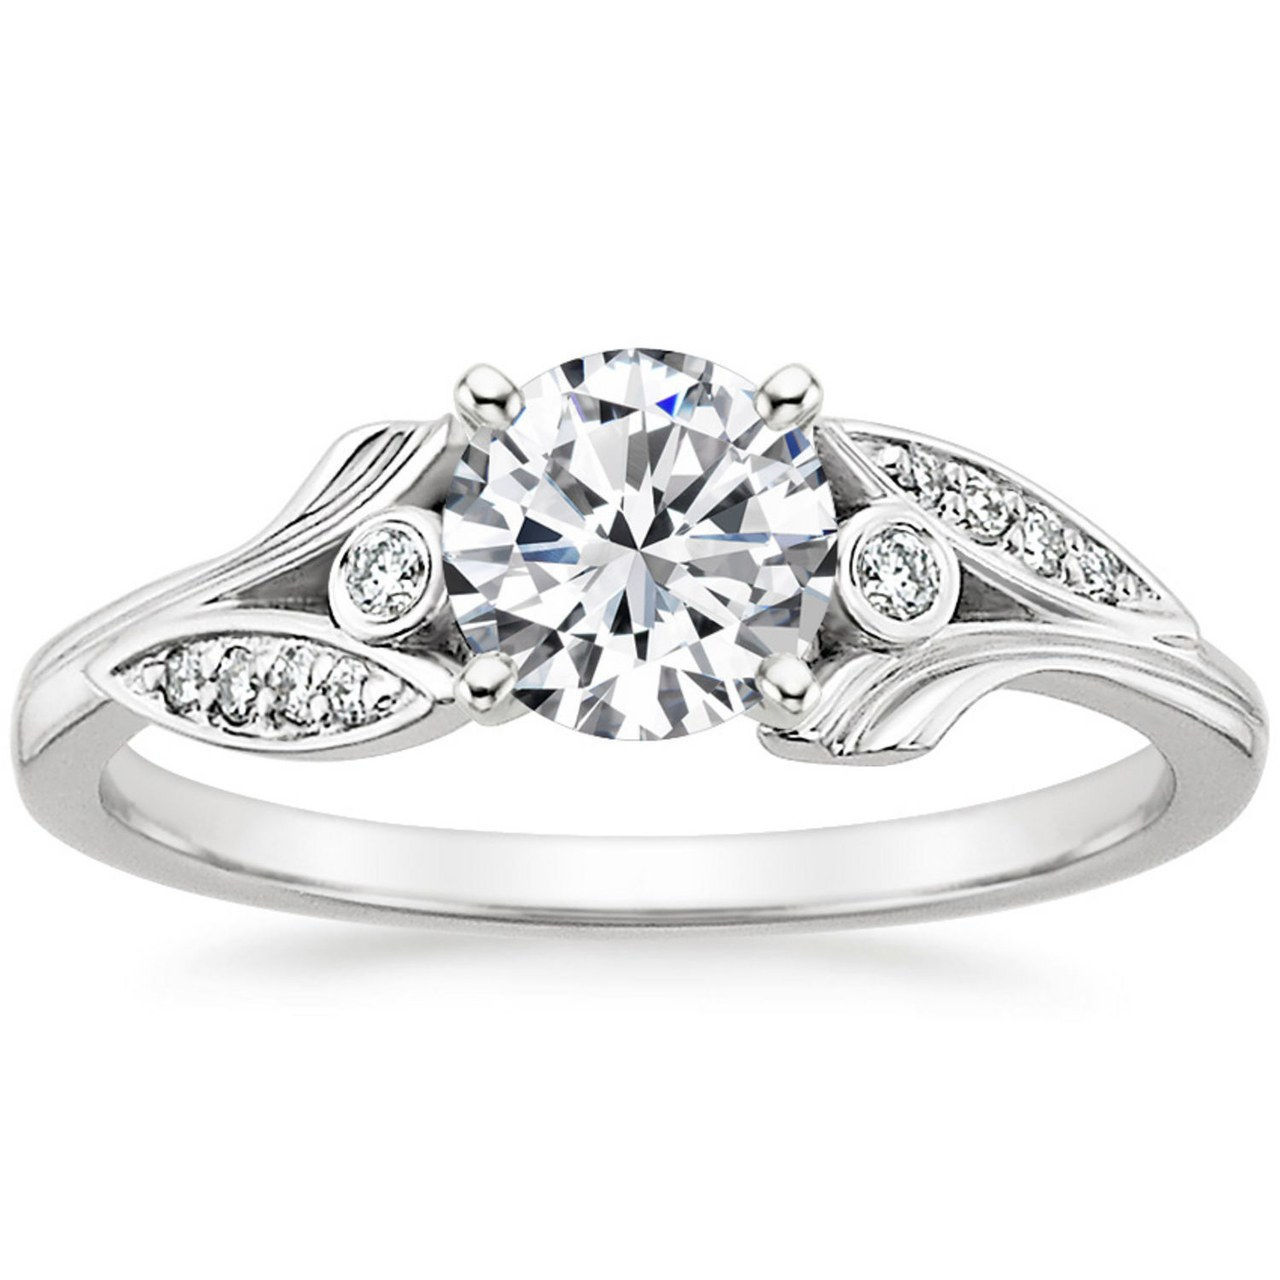 3 best new engagement rings 1229 courtesy brilliant earth